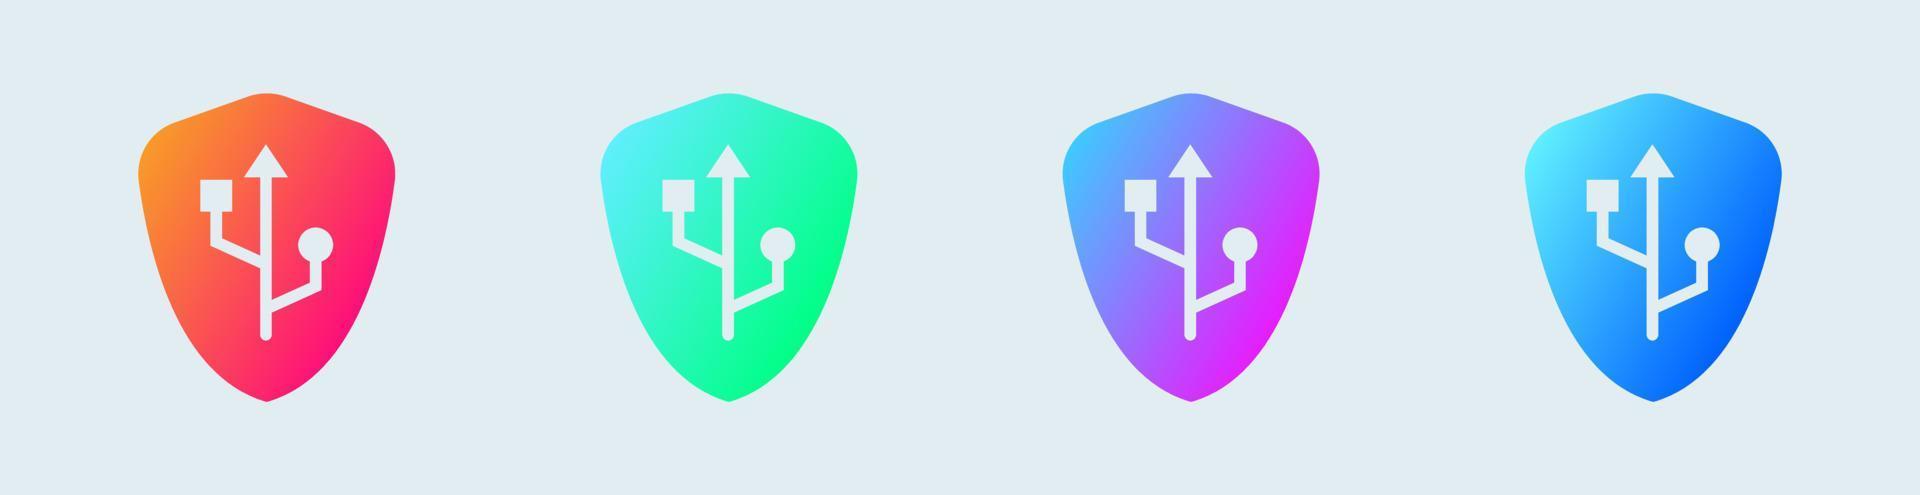 Secure usb solid icon in gradient colors. Data transfer signs vector illustration.